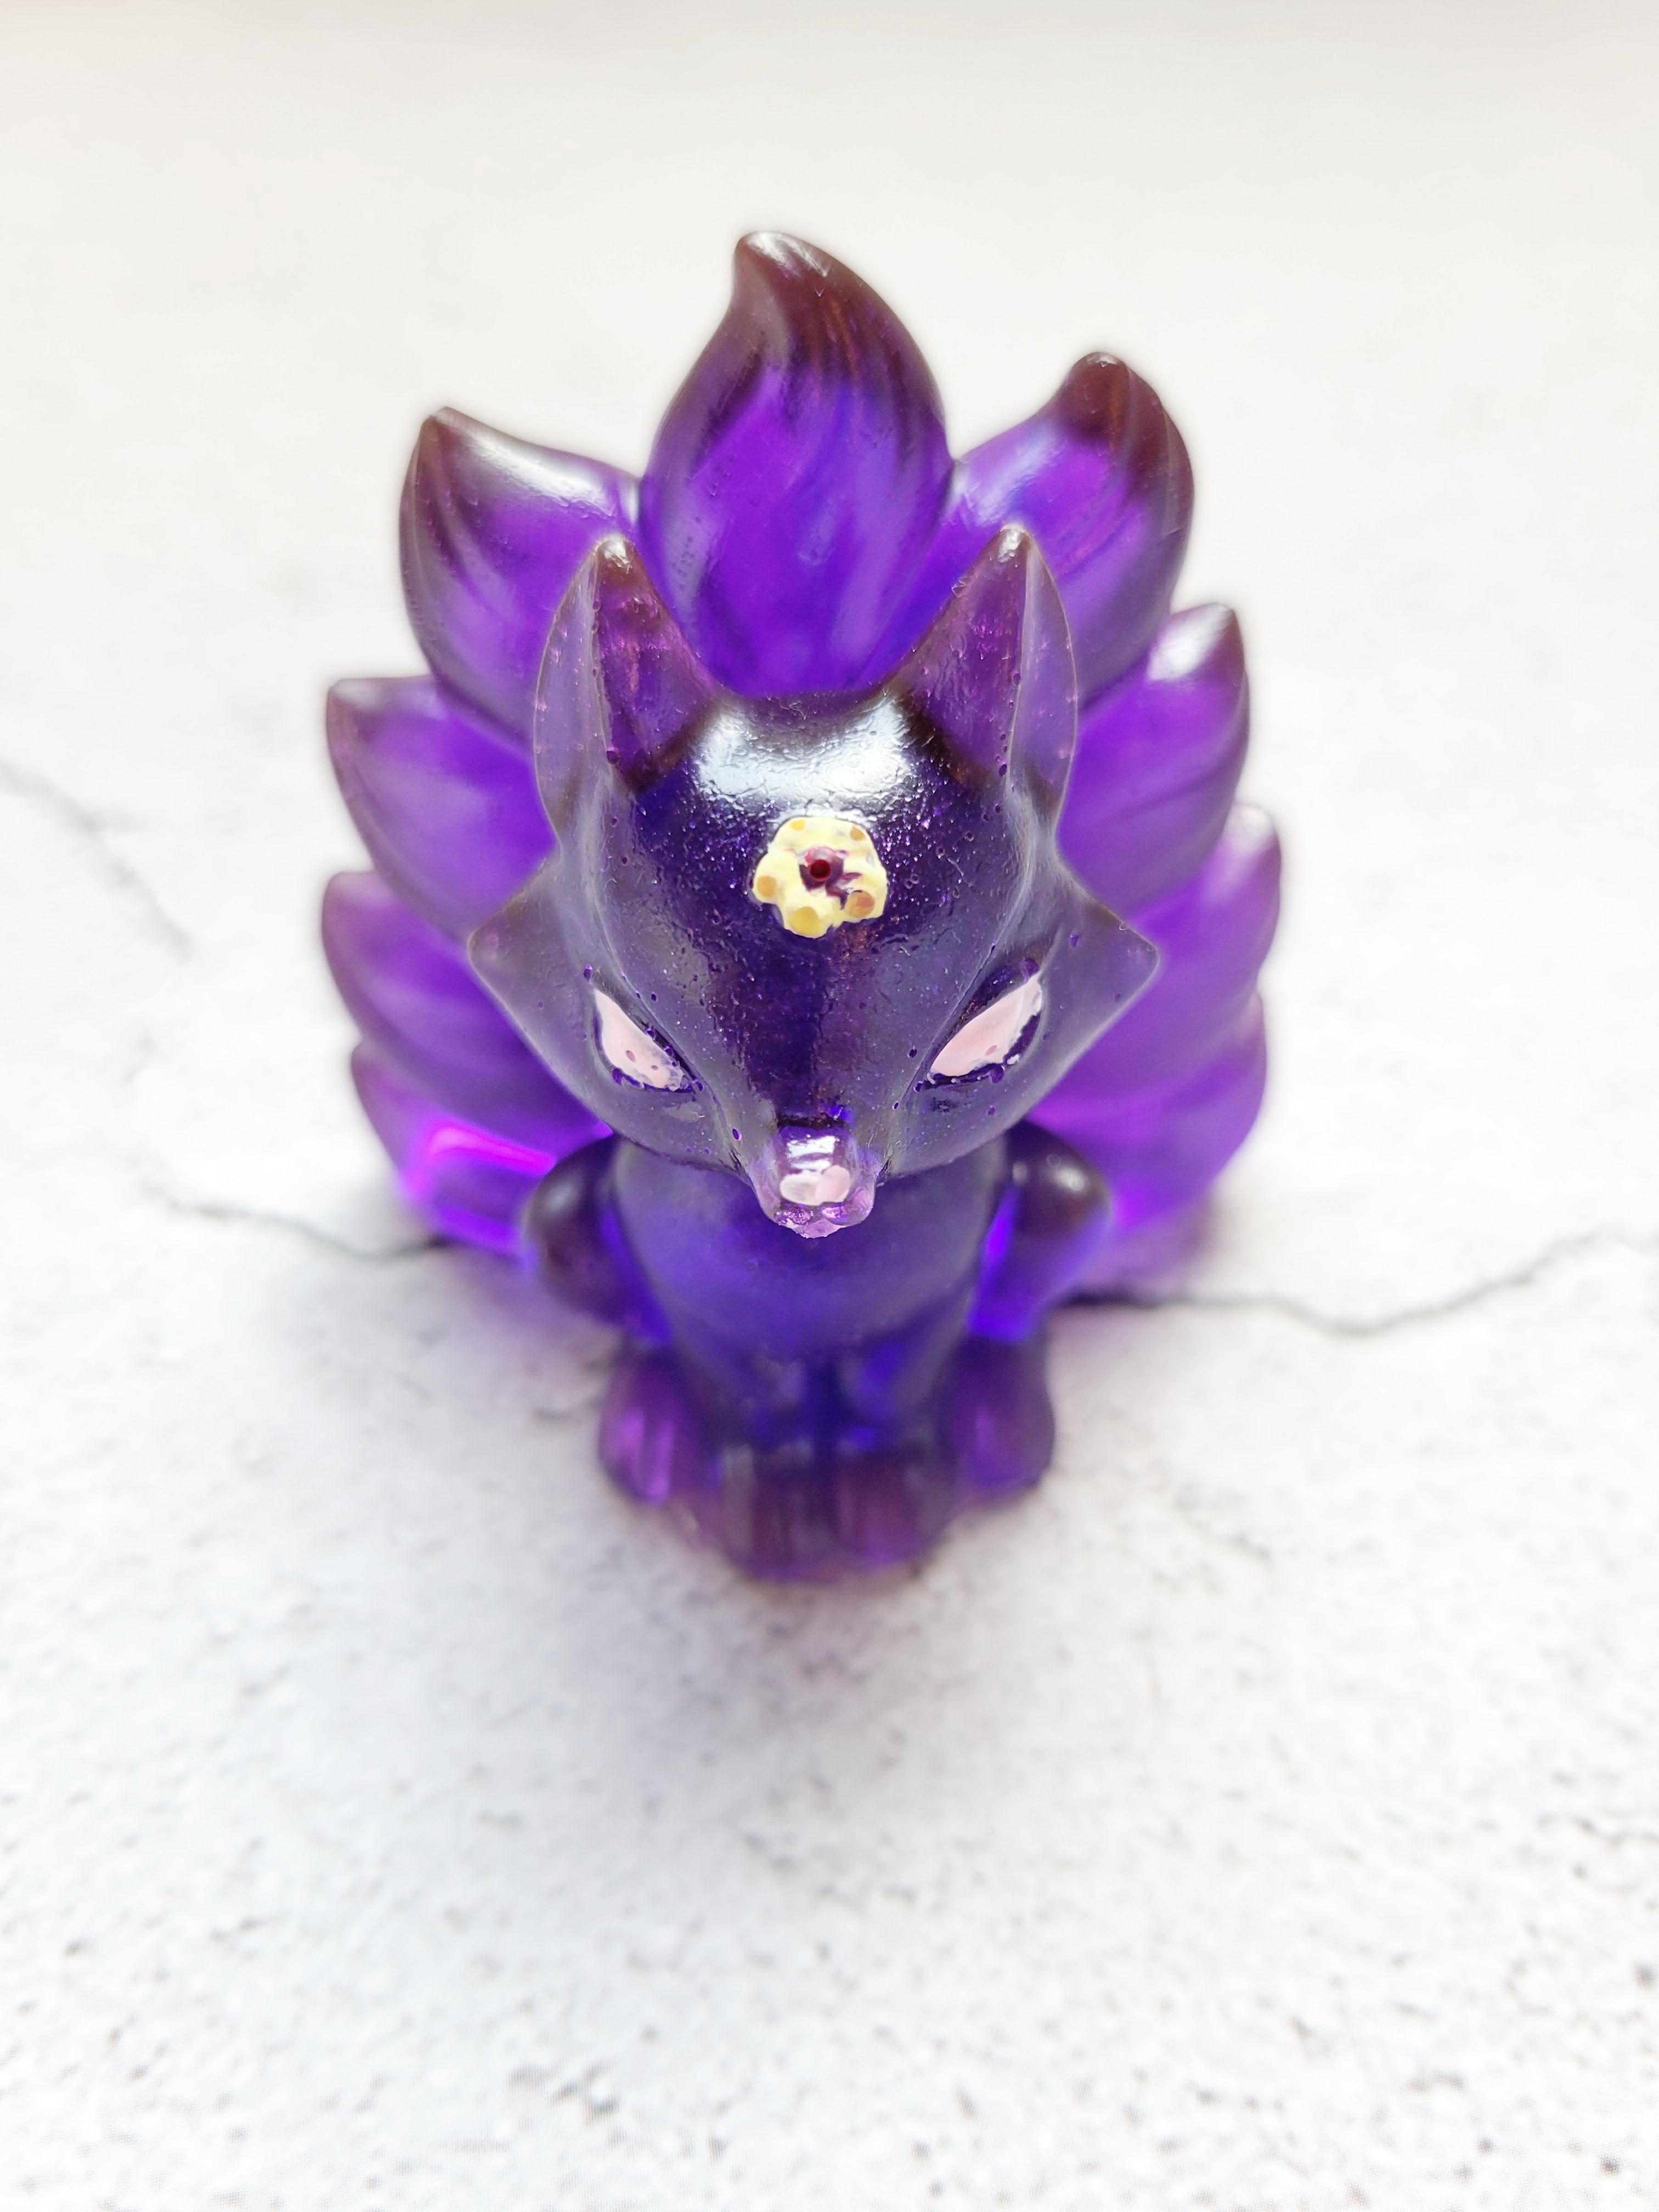 A front view of a sitting kitsune fox figure with nine tails. It's a deep purple color with a yellow flower on its head, white eyes and nose.